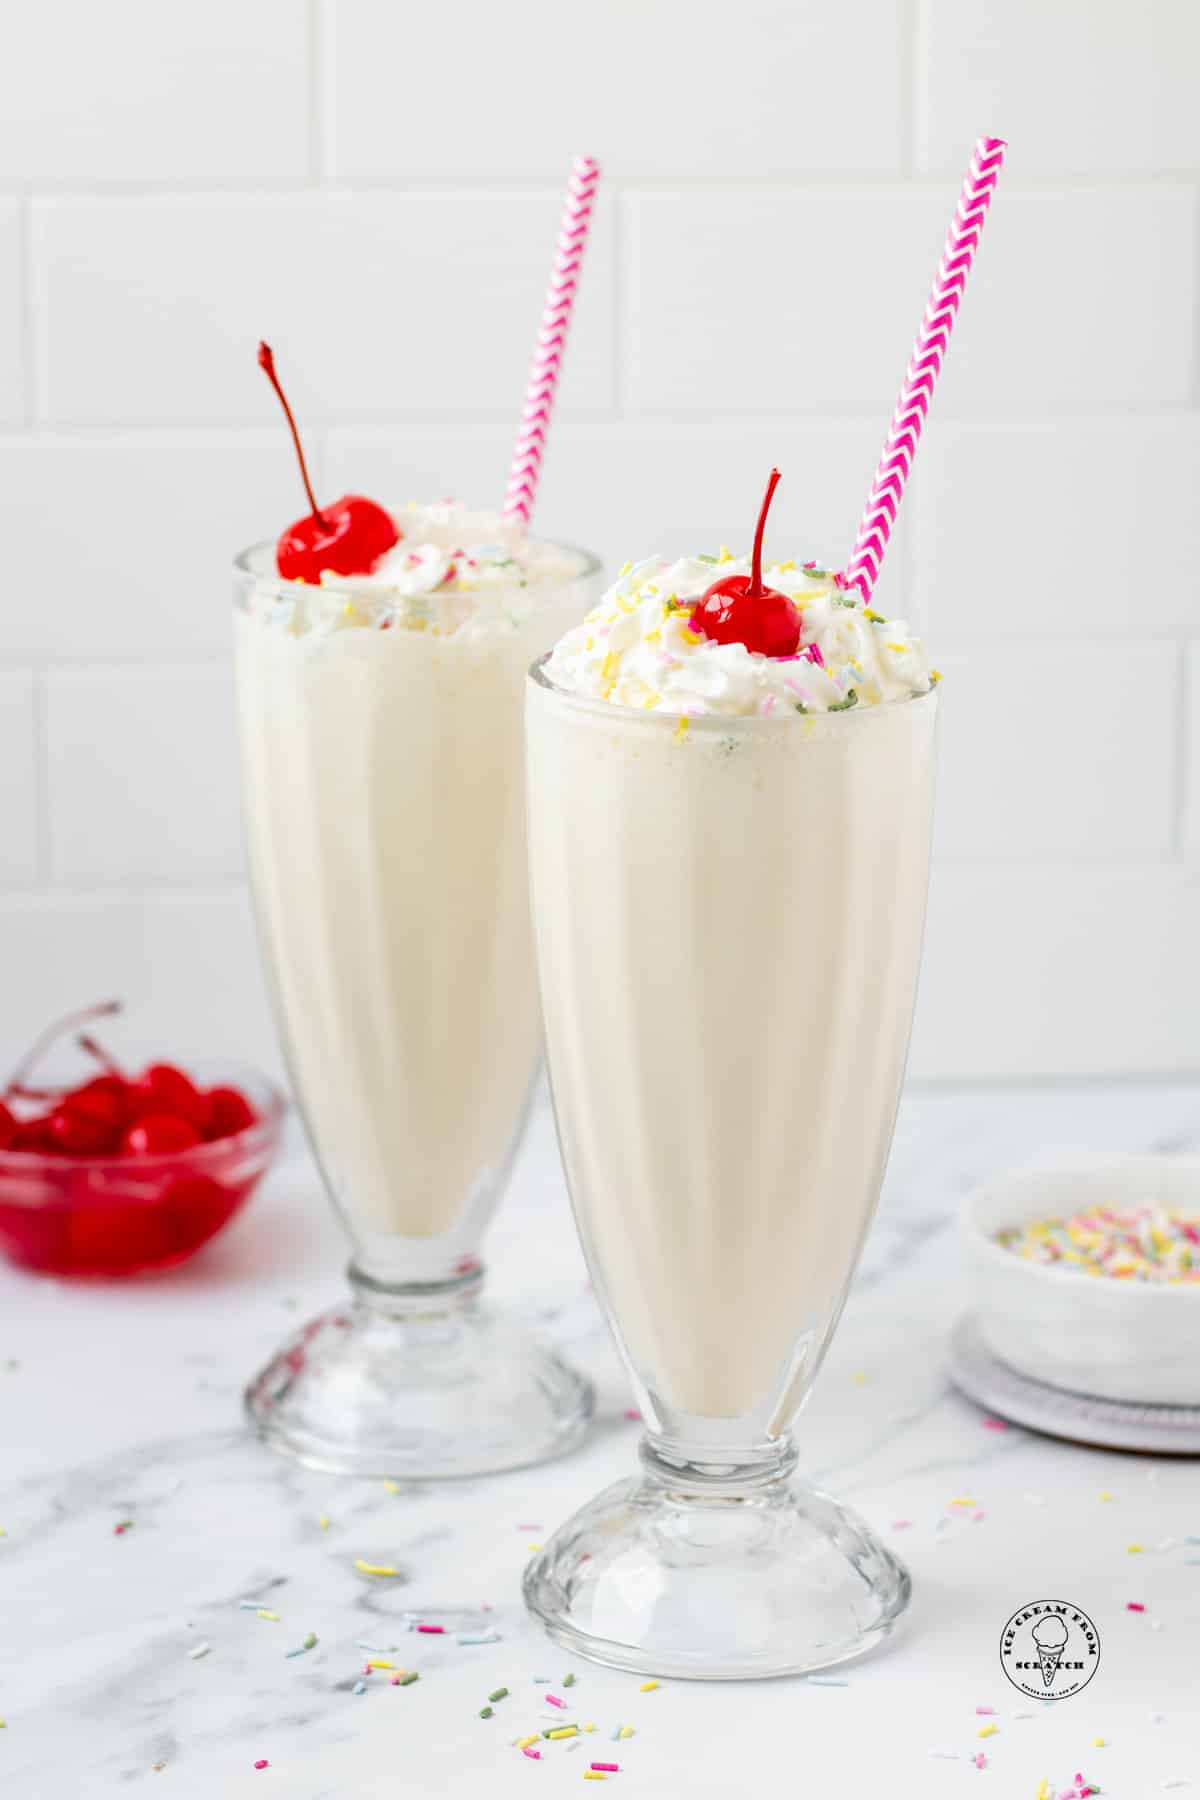 two old fashioned milkshake glasses filled with vanilla milkshake, topped with whipped cream, cherries, and rainbow sprinkles